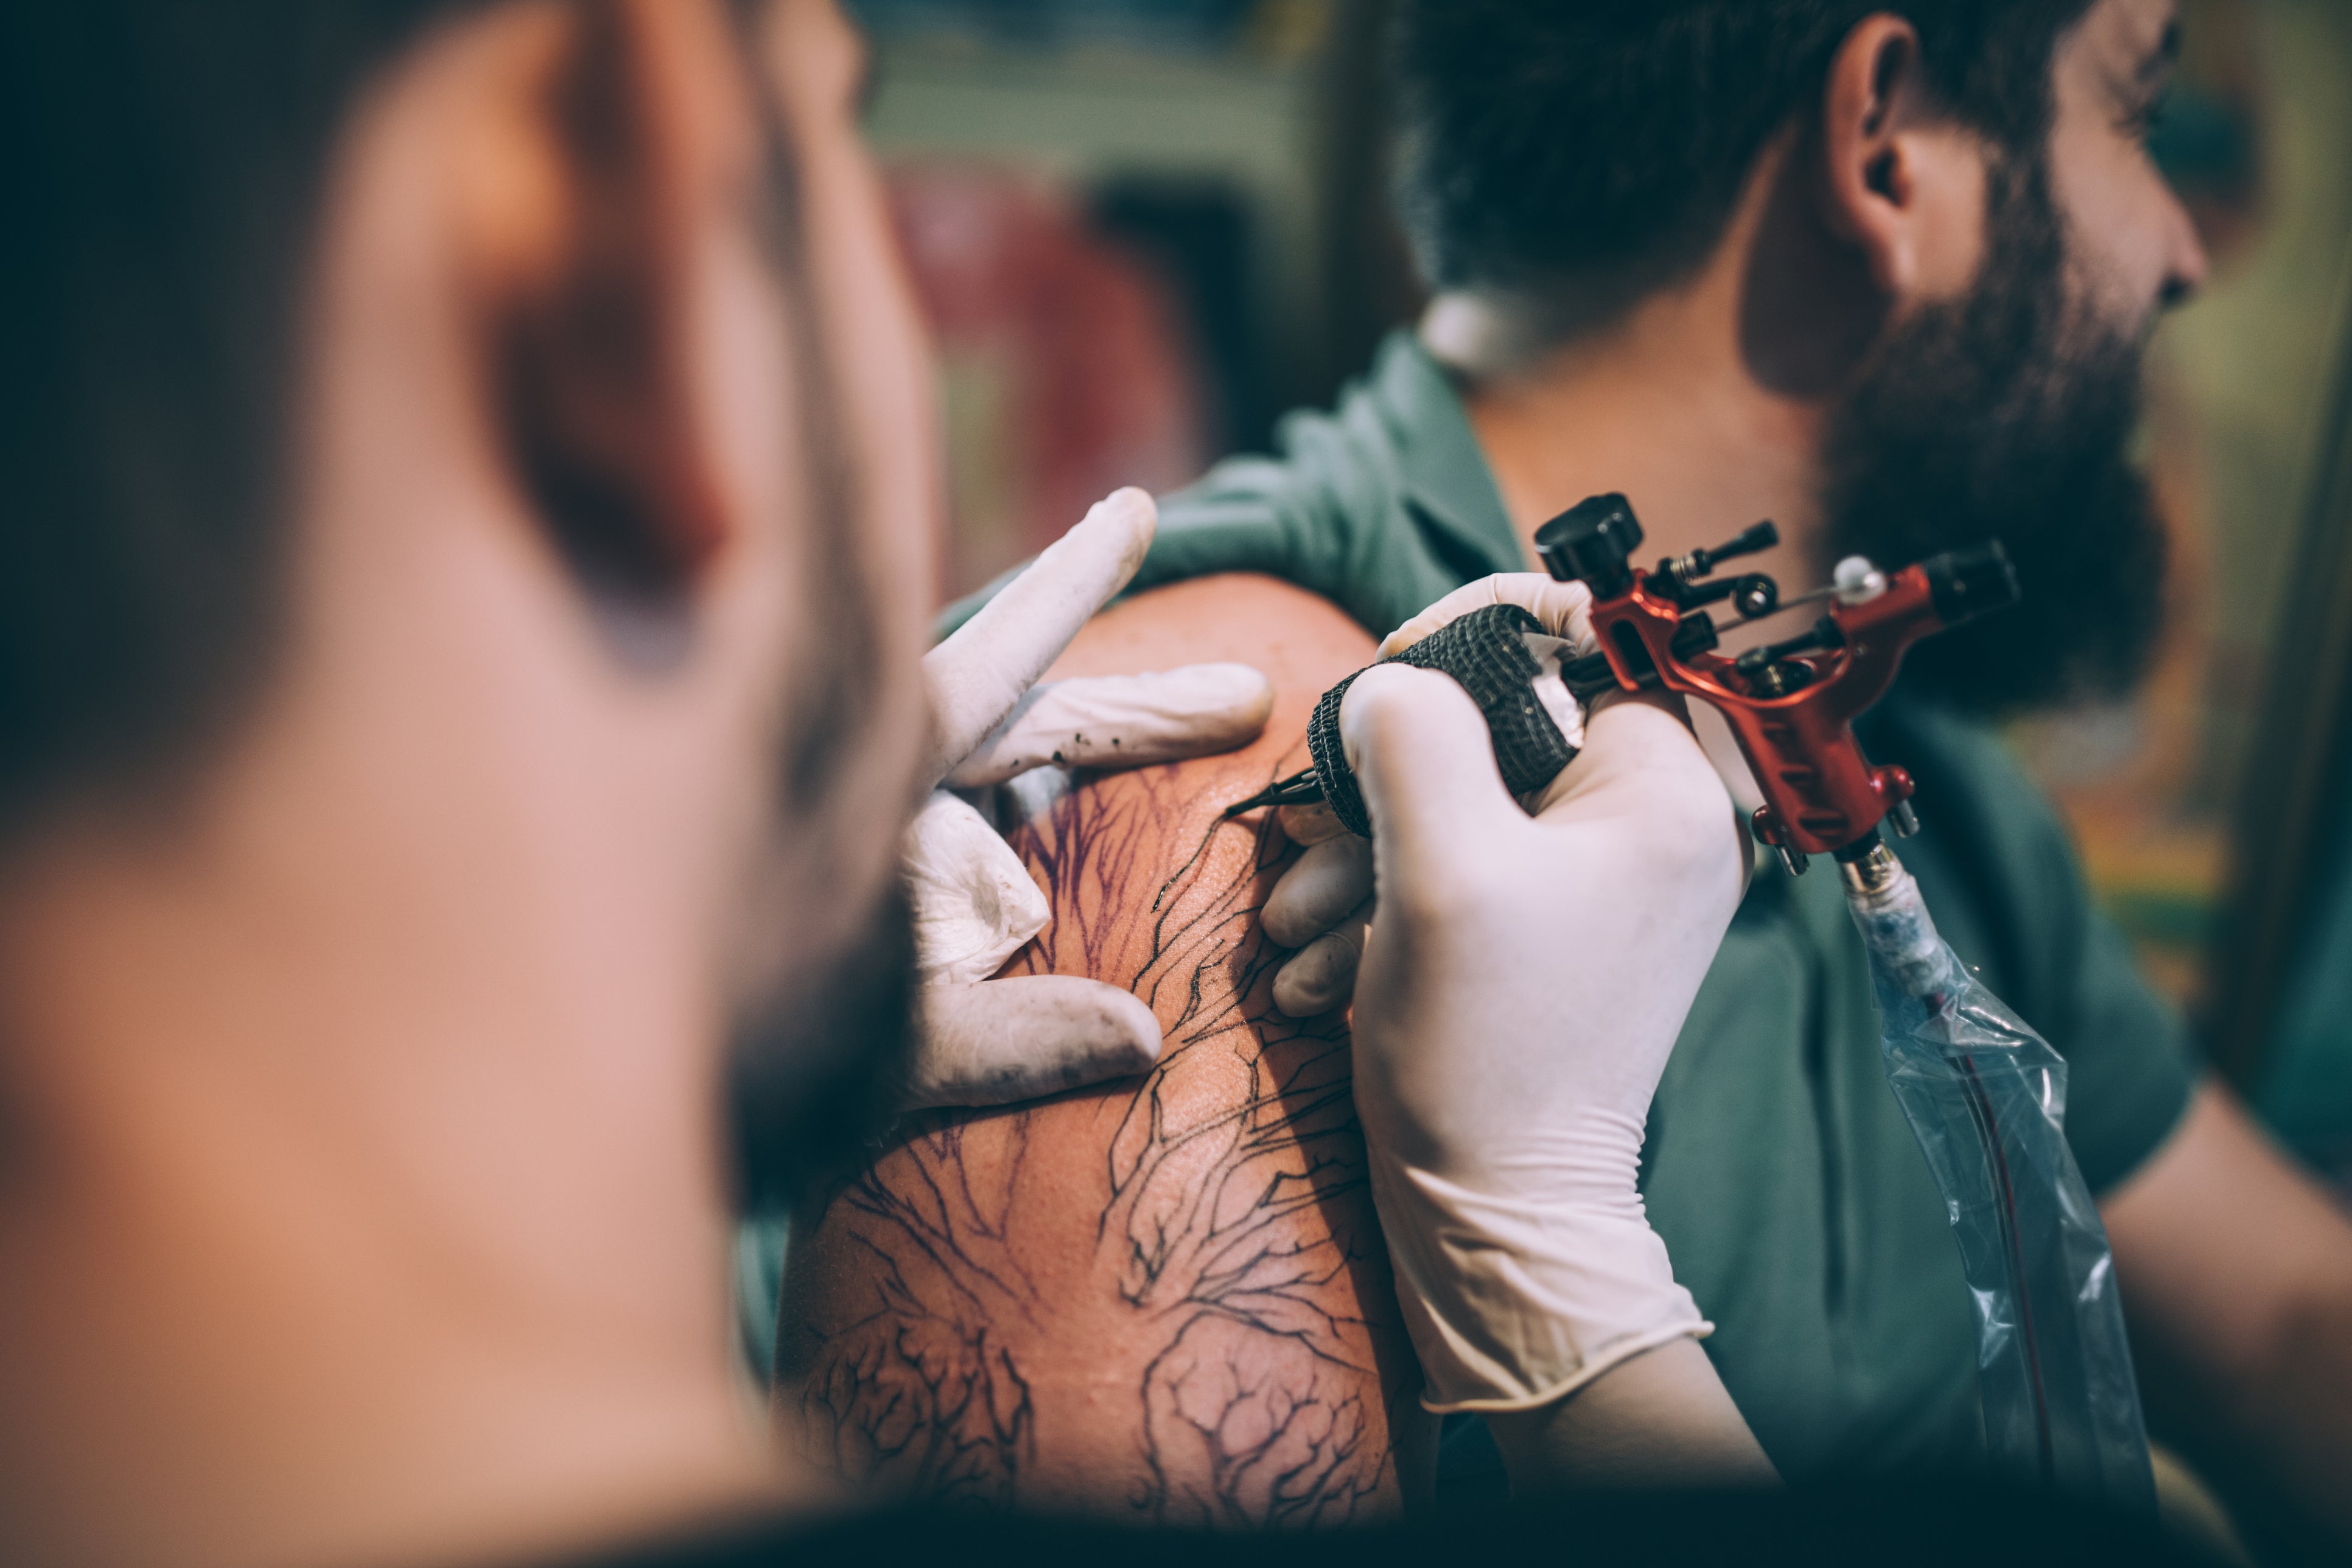 Tattooing is more than a job, it's a way to express and communicate a  person's life,